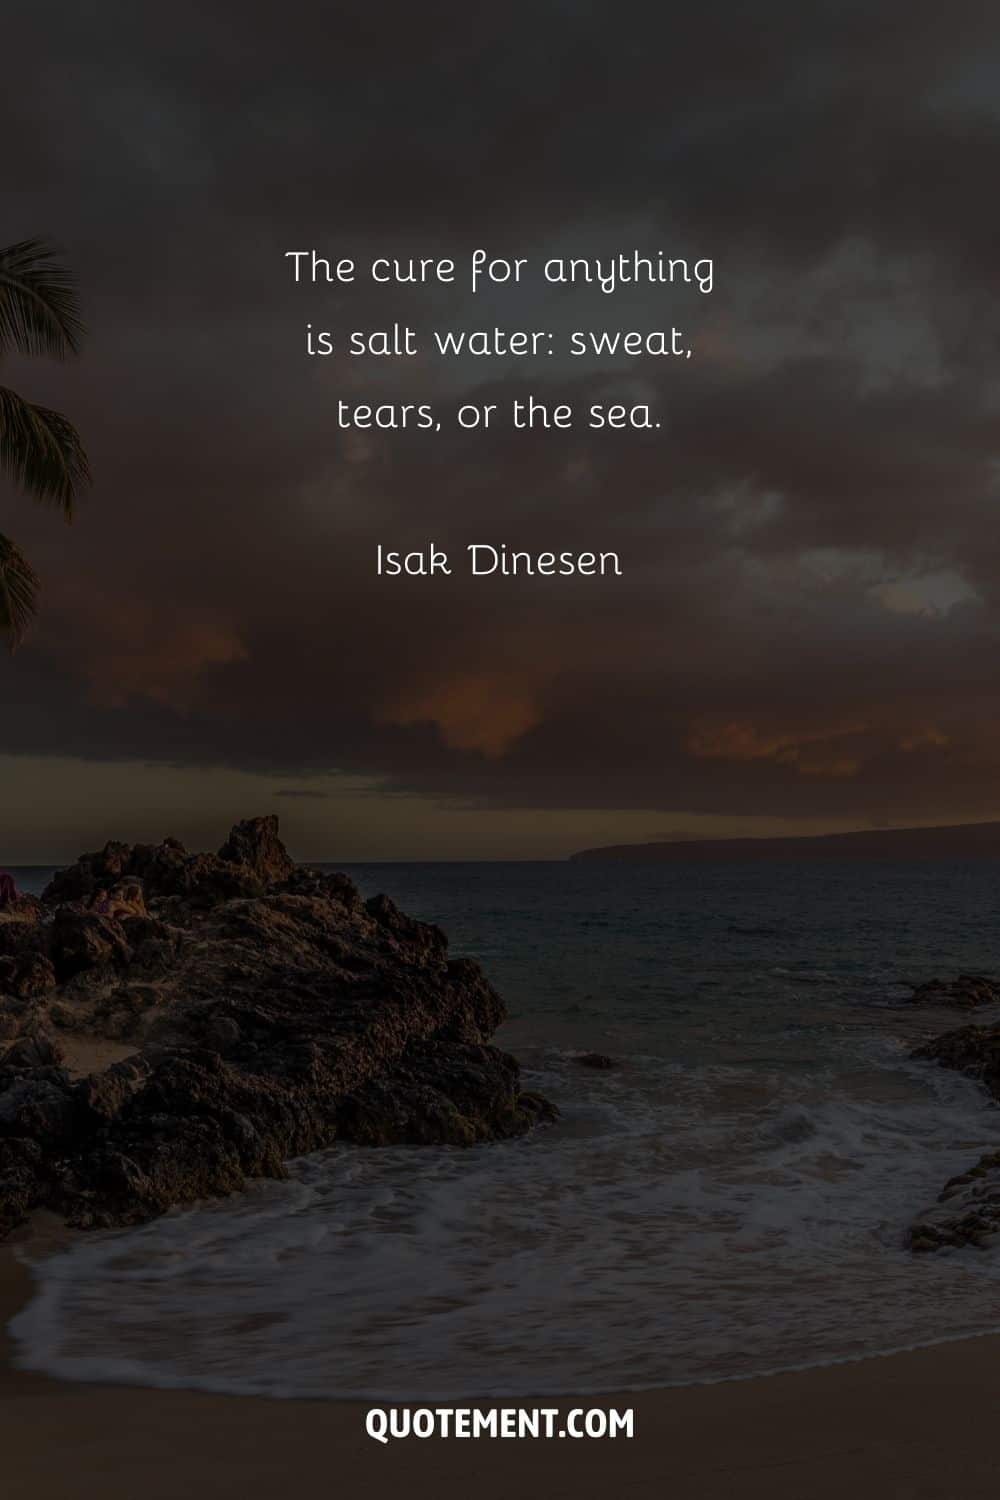 The cure for anything is salt water sweat, tears, or the sea. — Isak Dinesen